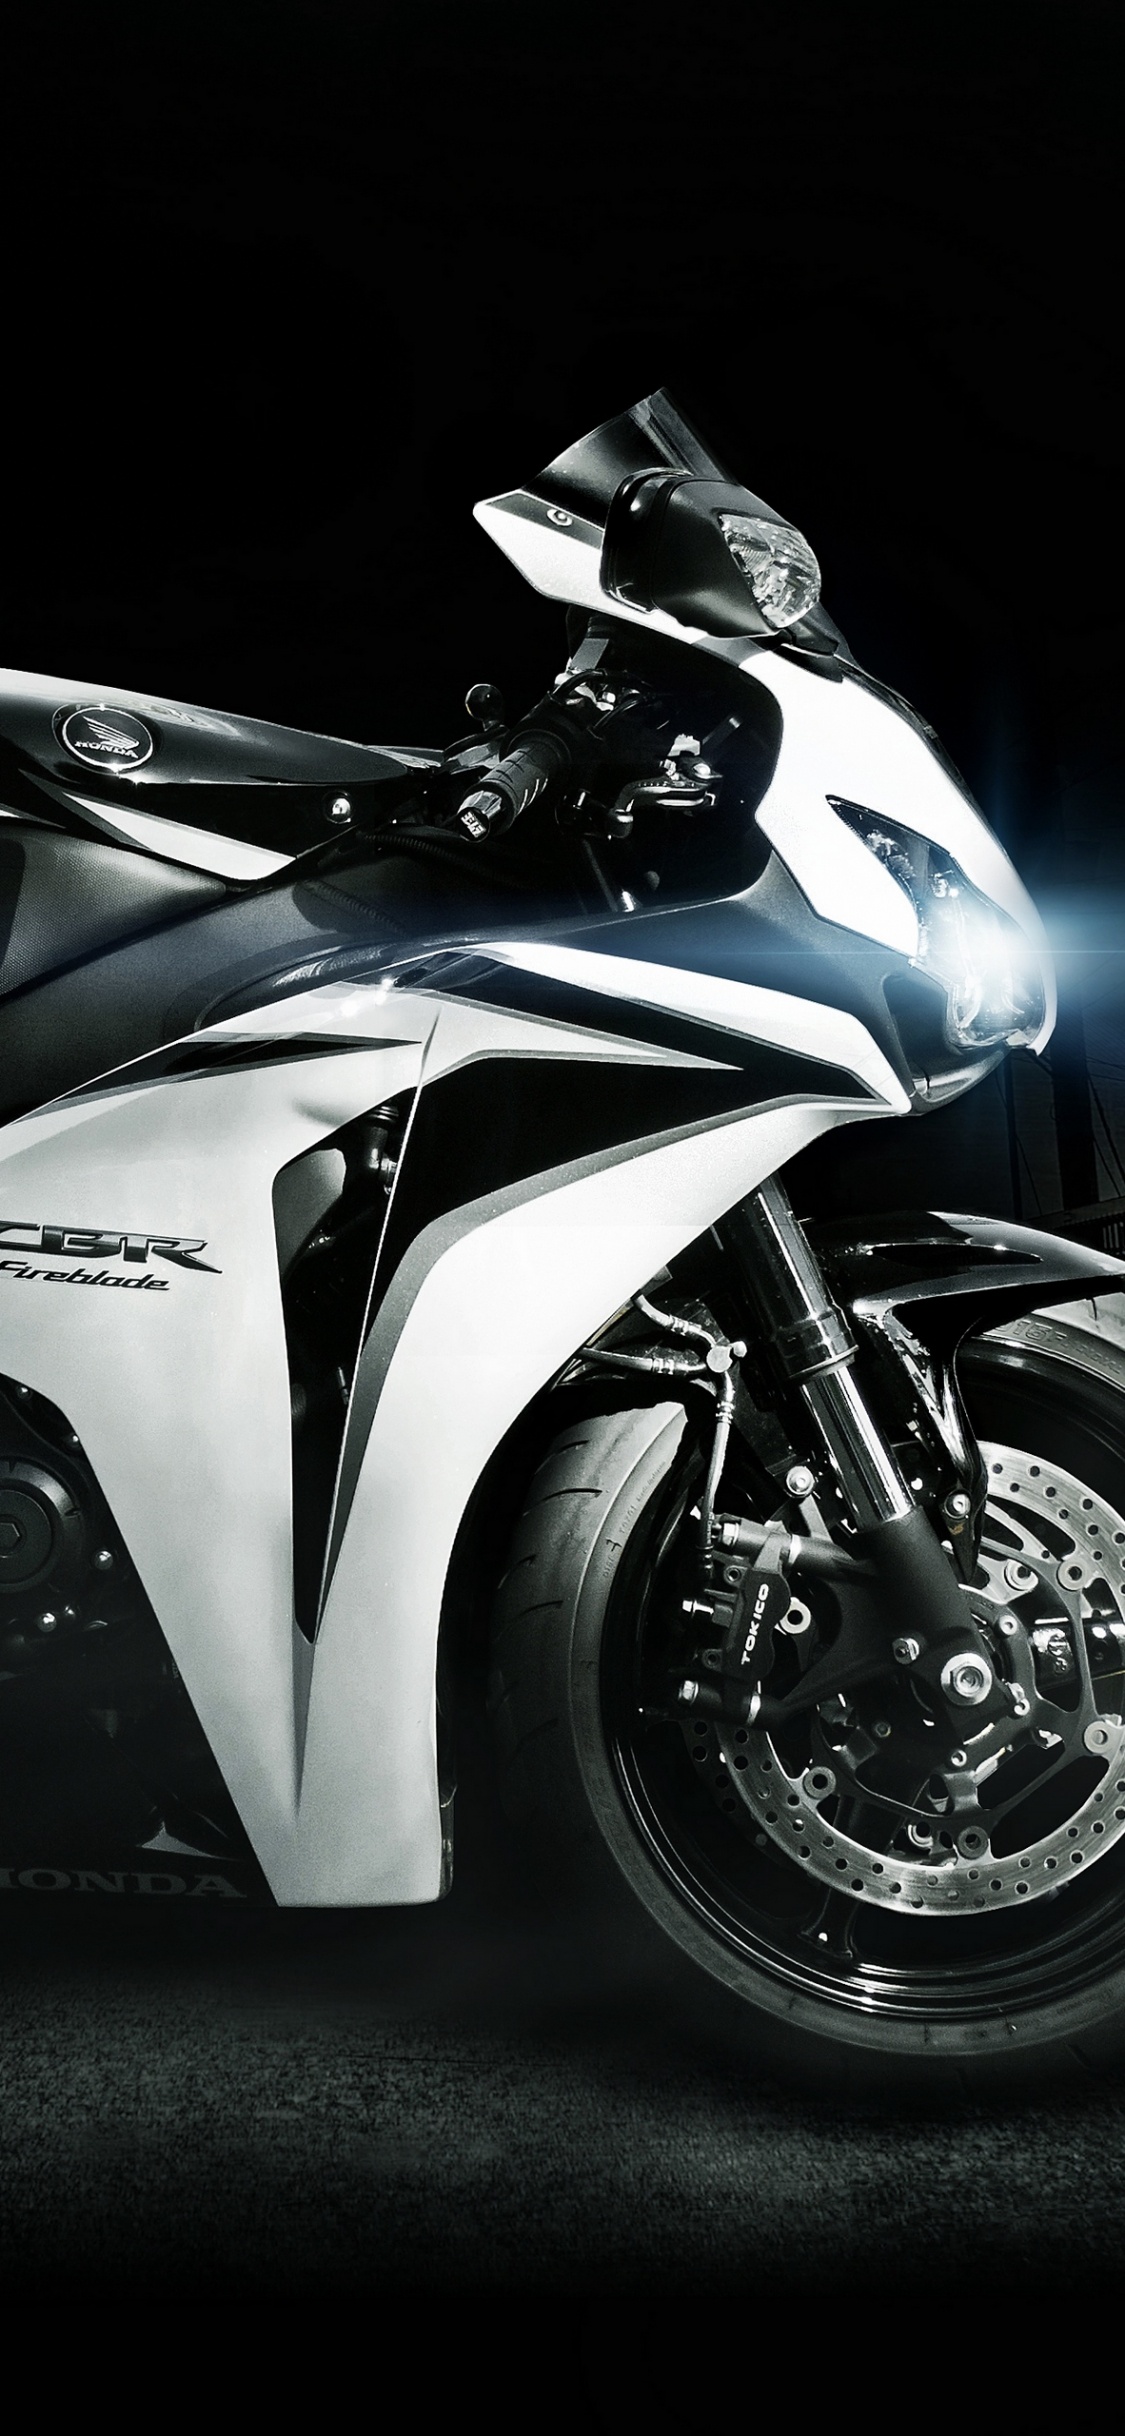 White and Black Sports Bike. Wallpaper in 1125x2436 Resolution